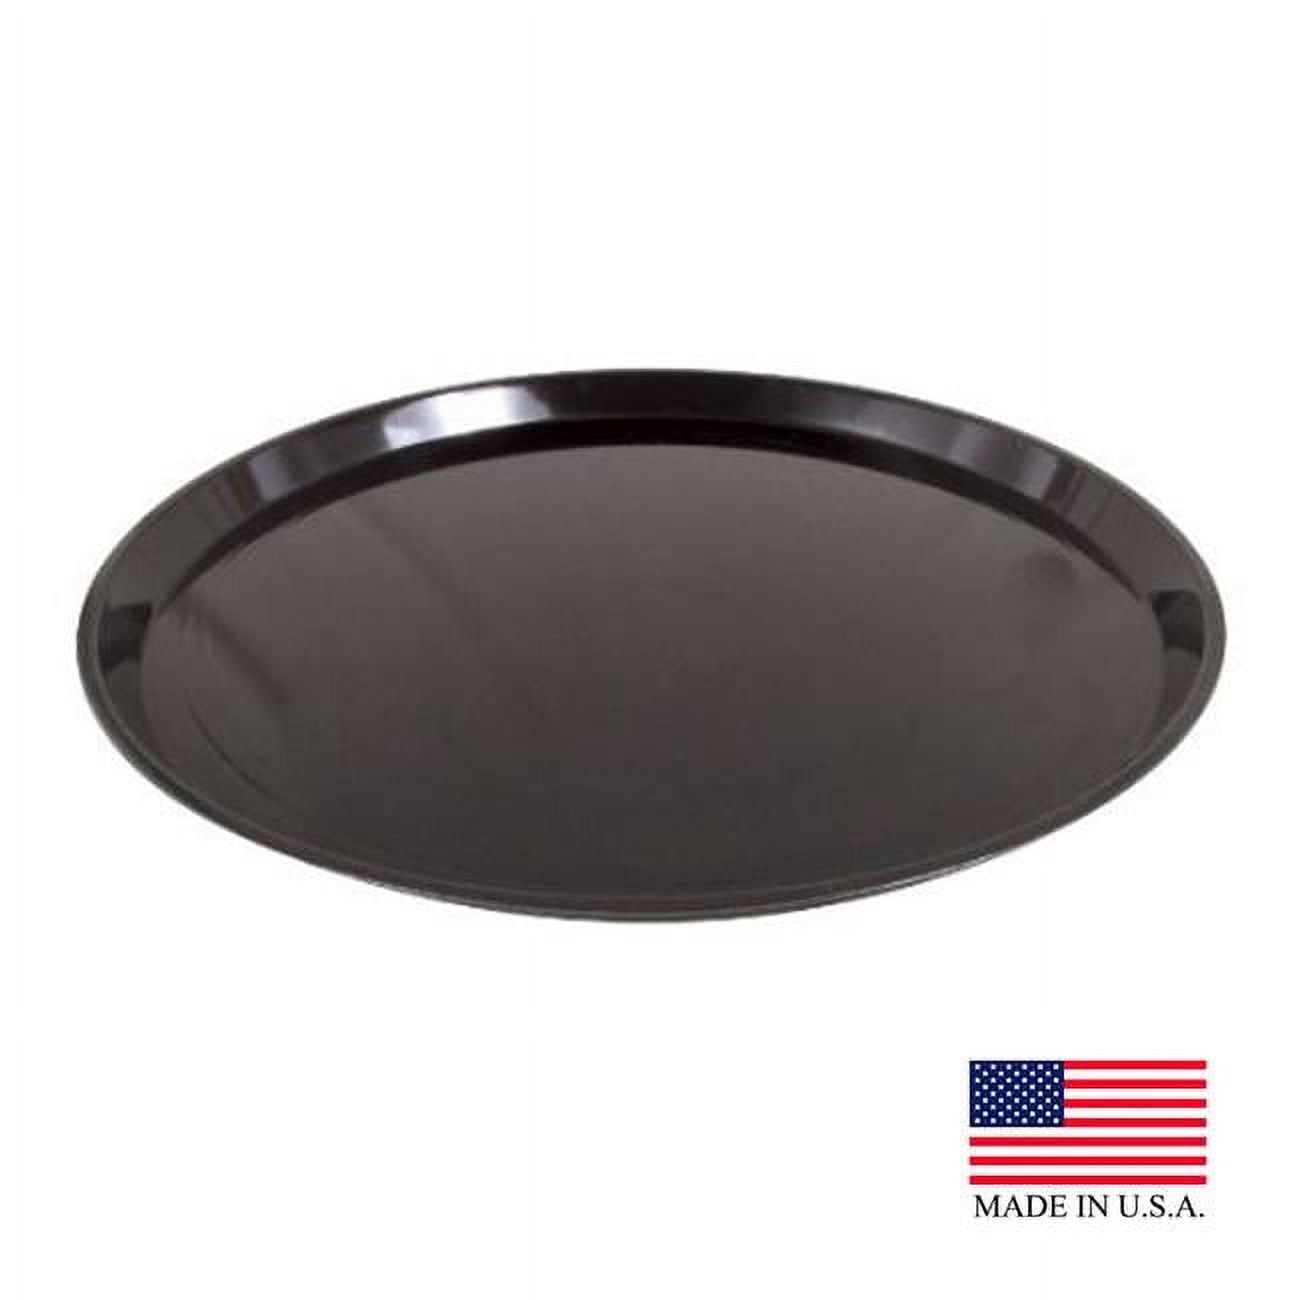 Stak16rb Pe 16 In. Stakmate Tray, Black - Case Of 25